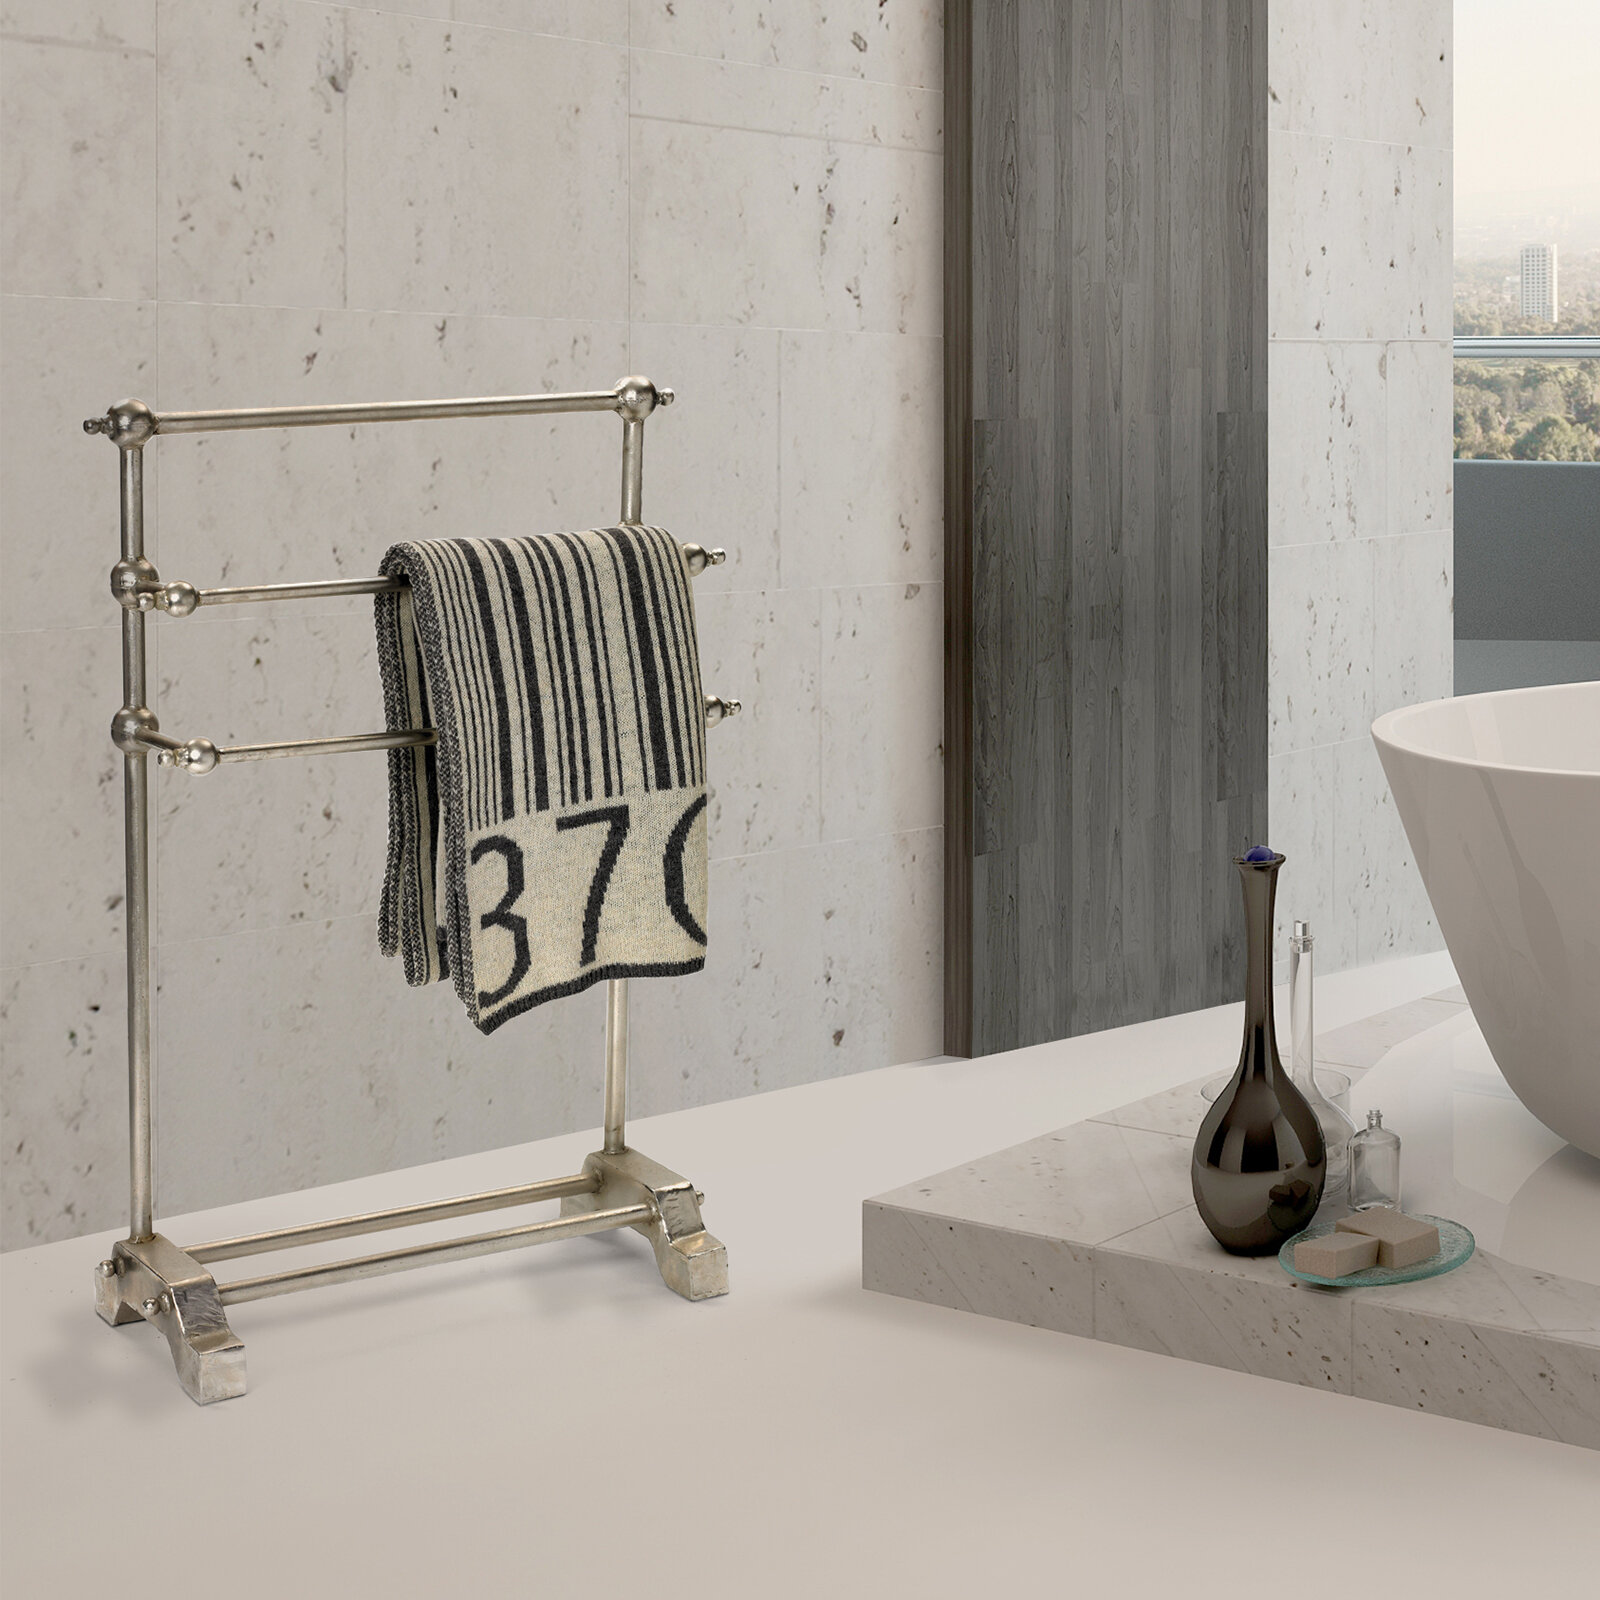 Polished Nickel Towel Stand Hot Sale 1690436033